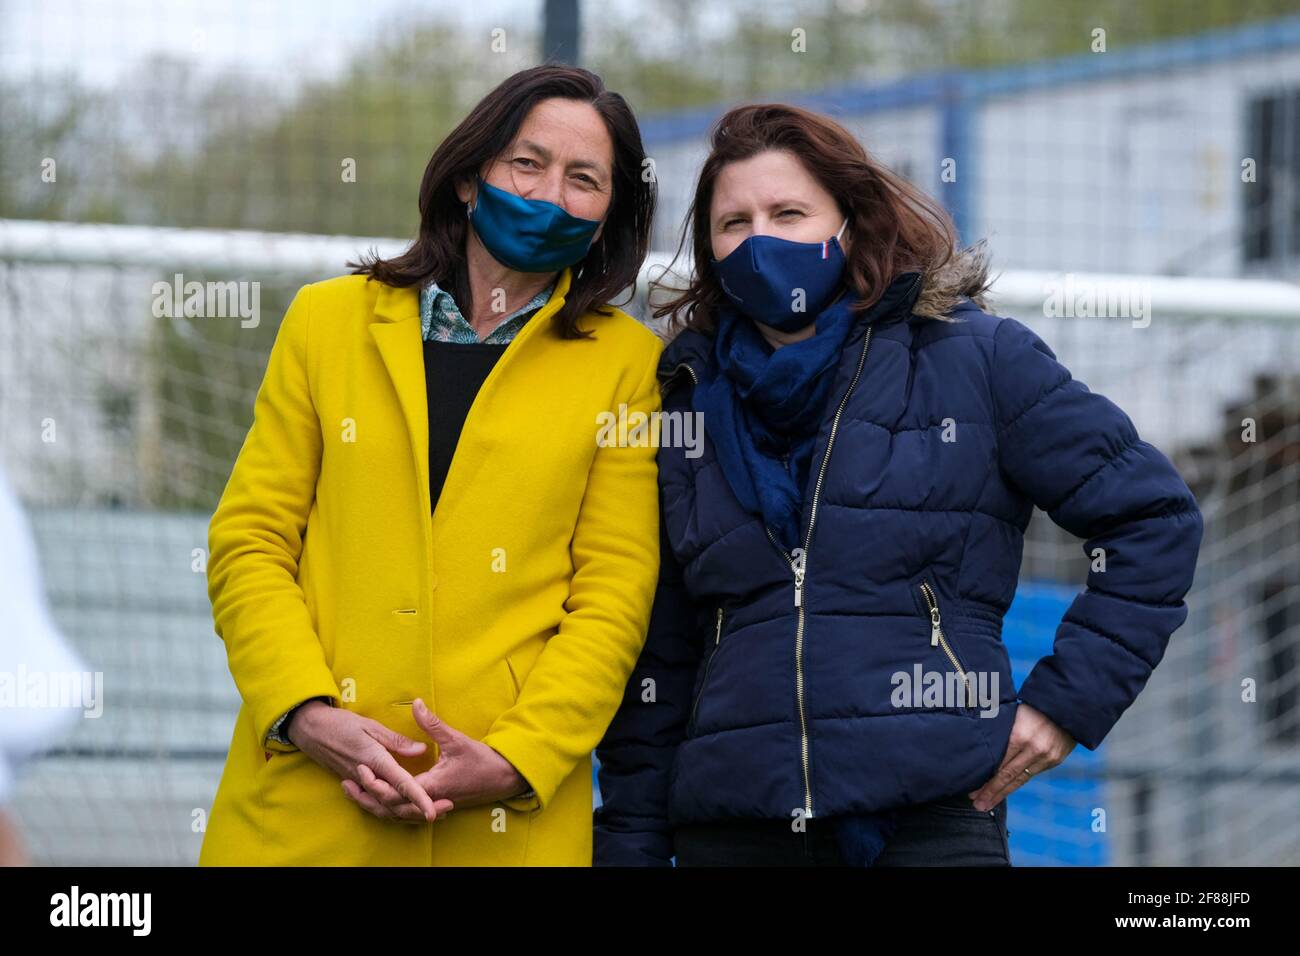 Toulouse, France. 12th Apr, 2021. Roxana Maracineanu (R), Sandrine MÖRCH  (L, LREM deputy). The Sports and National Education ministers visited  Toulouse on April 12, 2021. They went to the Stade Toulousain, around